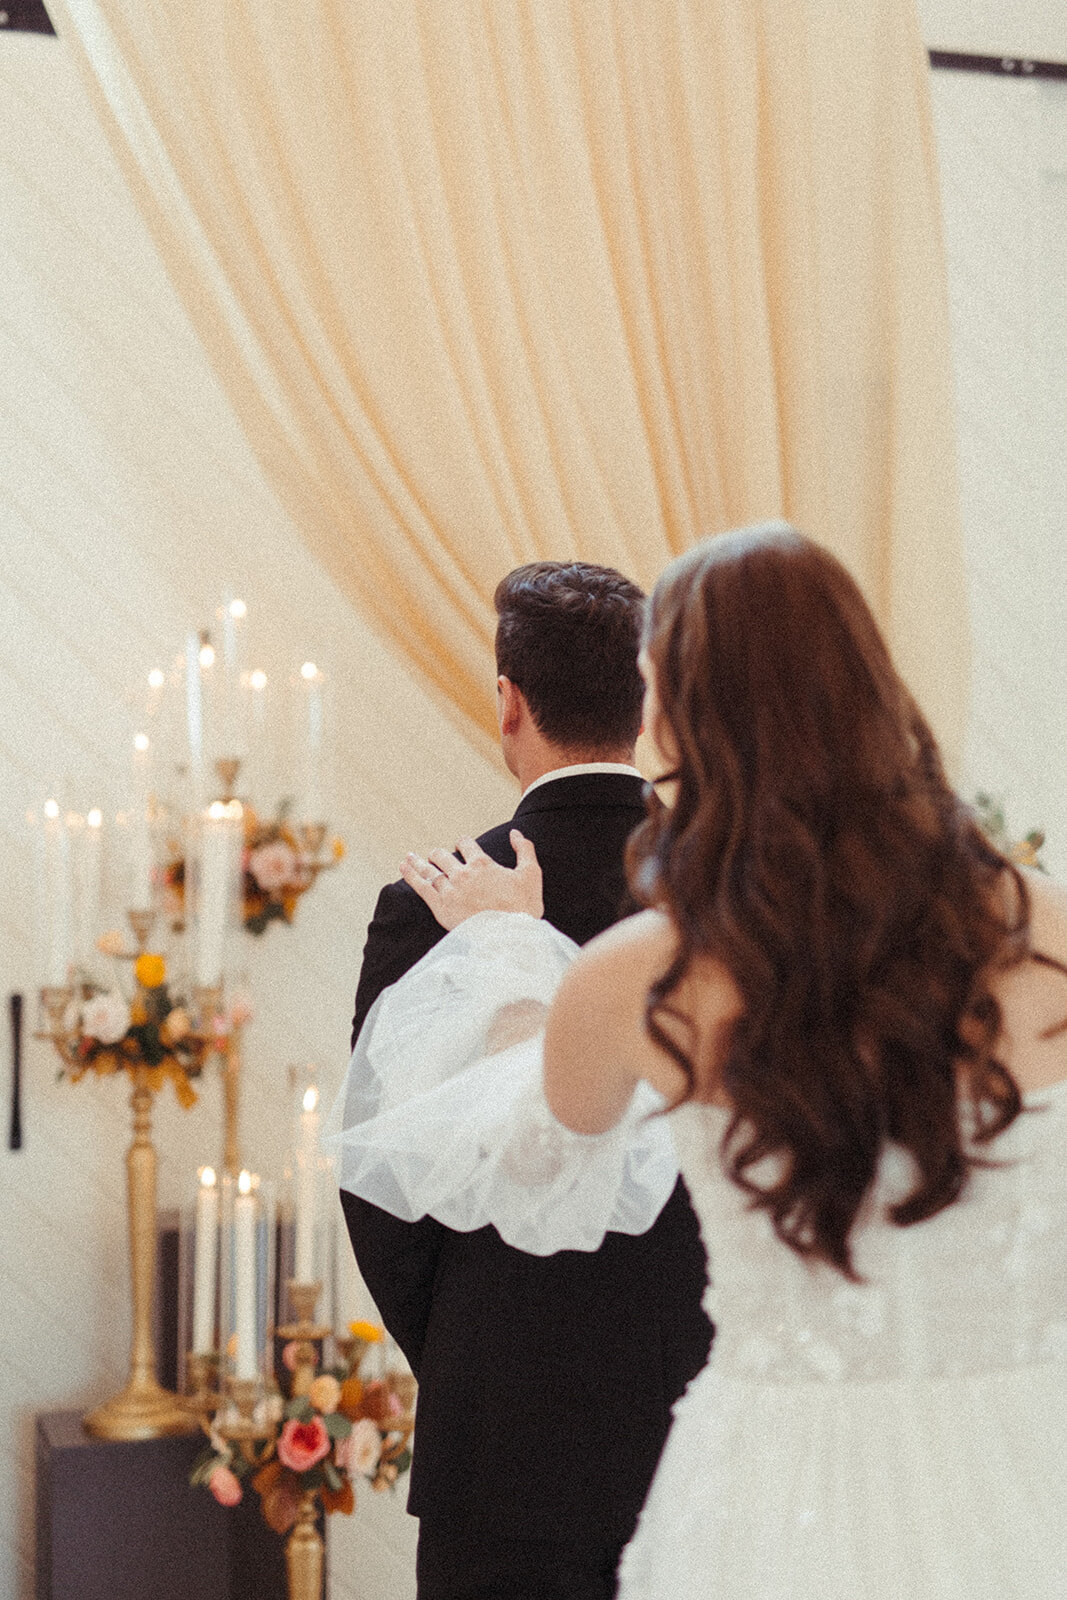 A bride wearing a white wedding gown touching the backside of the groom wearing a black tuxedo while standing at the altar.